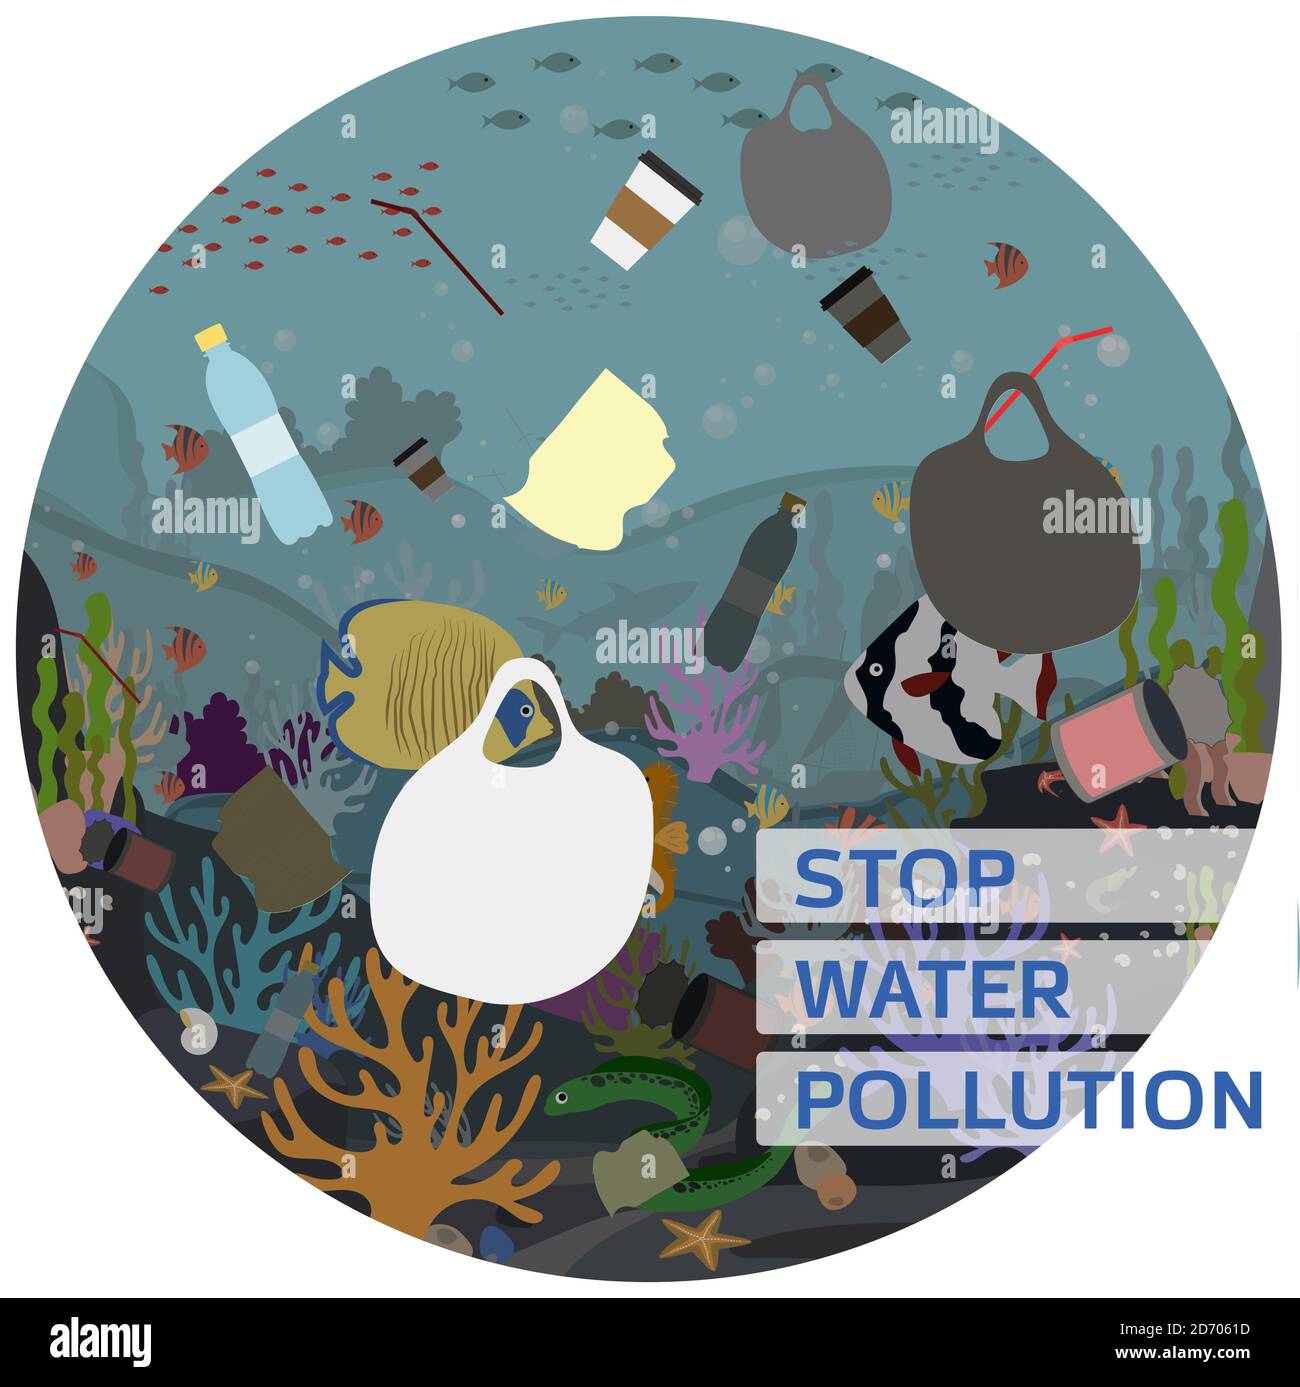 Flat vector illustration for protecting water and the environment from pollution. A picture of the underwater world with corals, fish, Moray eels, algae, polluted with garbage, plastic and waste. Poster for a call to recycle garbage and clean up the world s oceans. Stock Vector